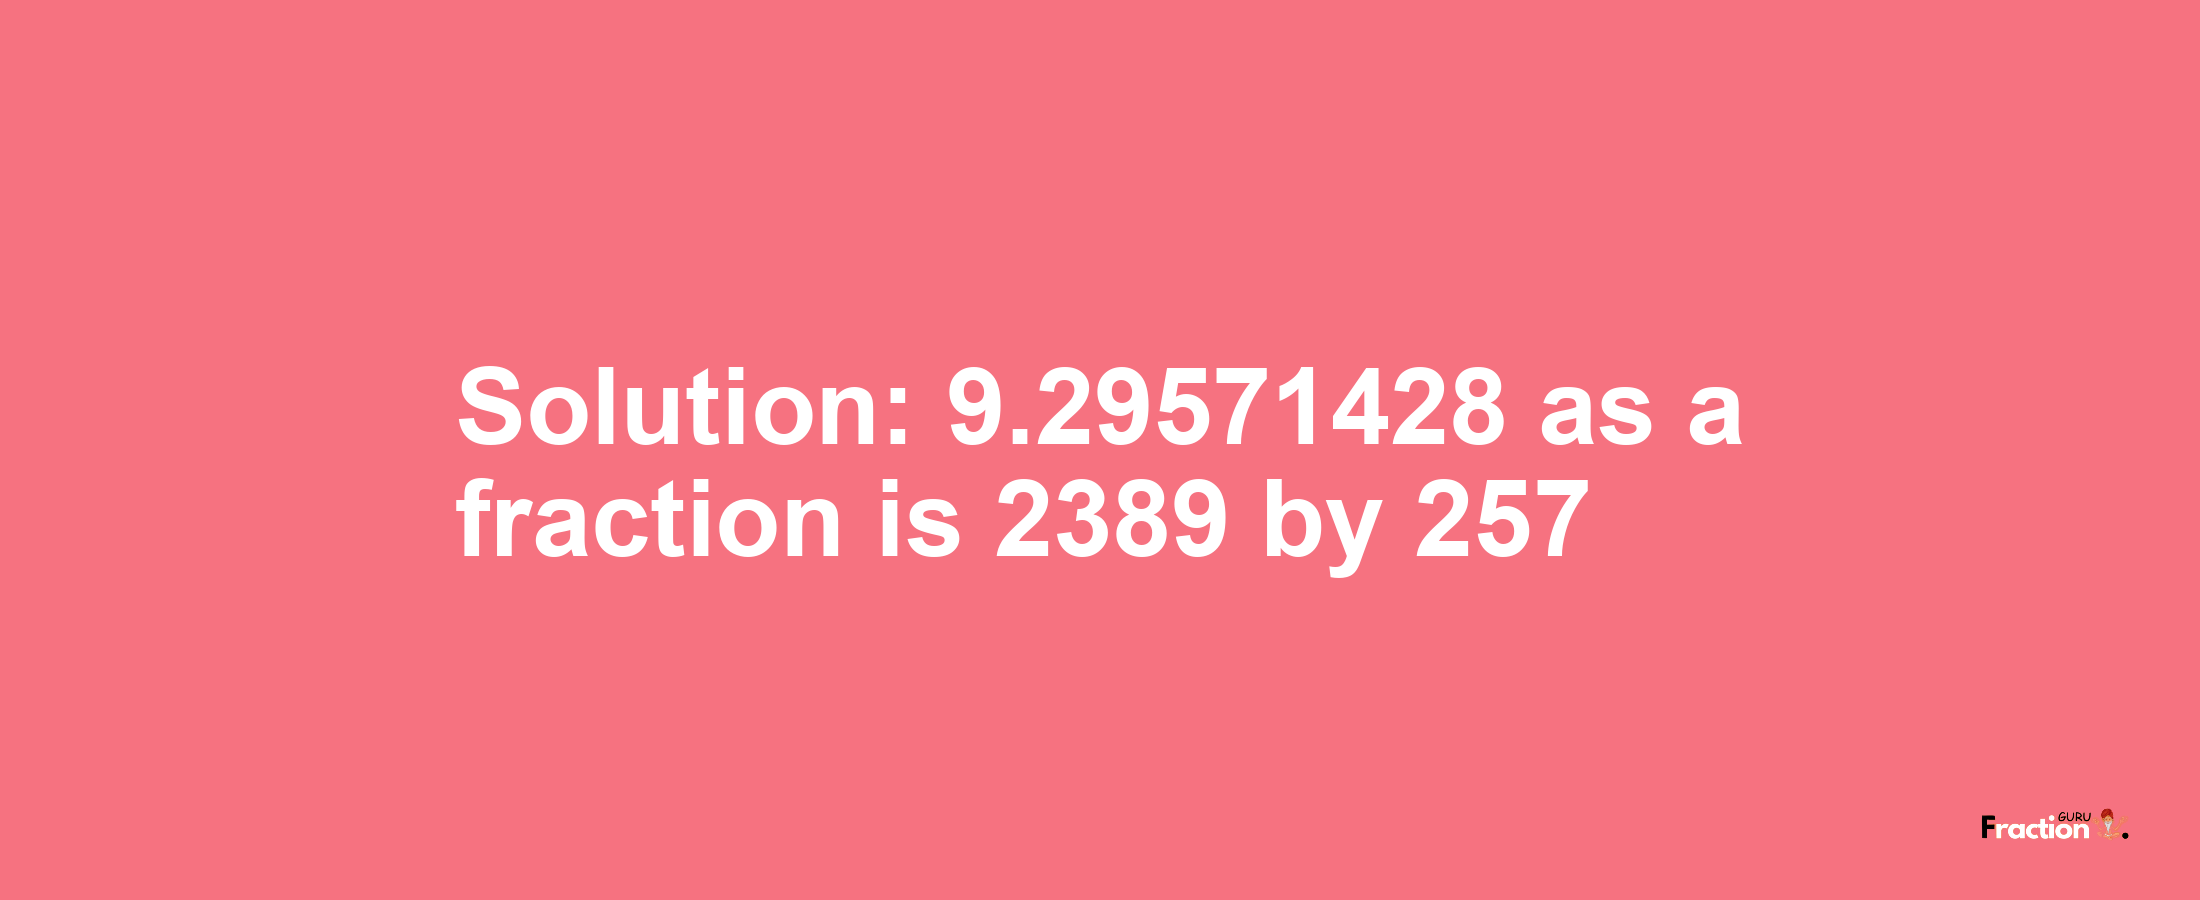 Solution:9.29571428 as a fraction is 2389/257